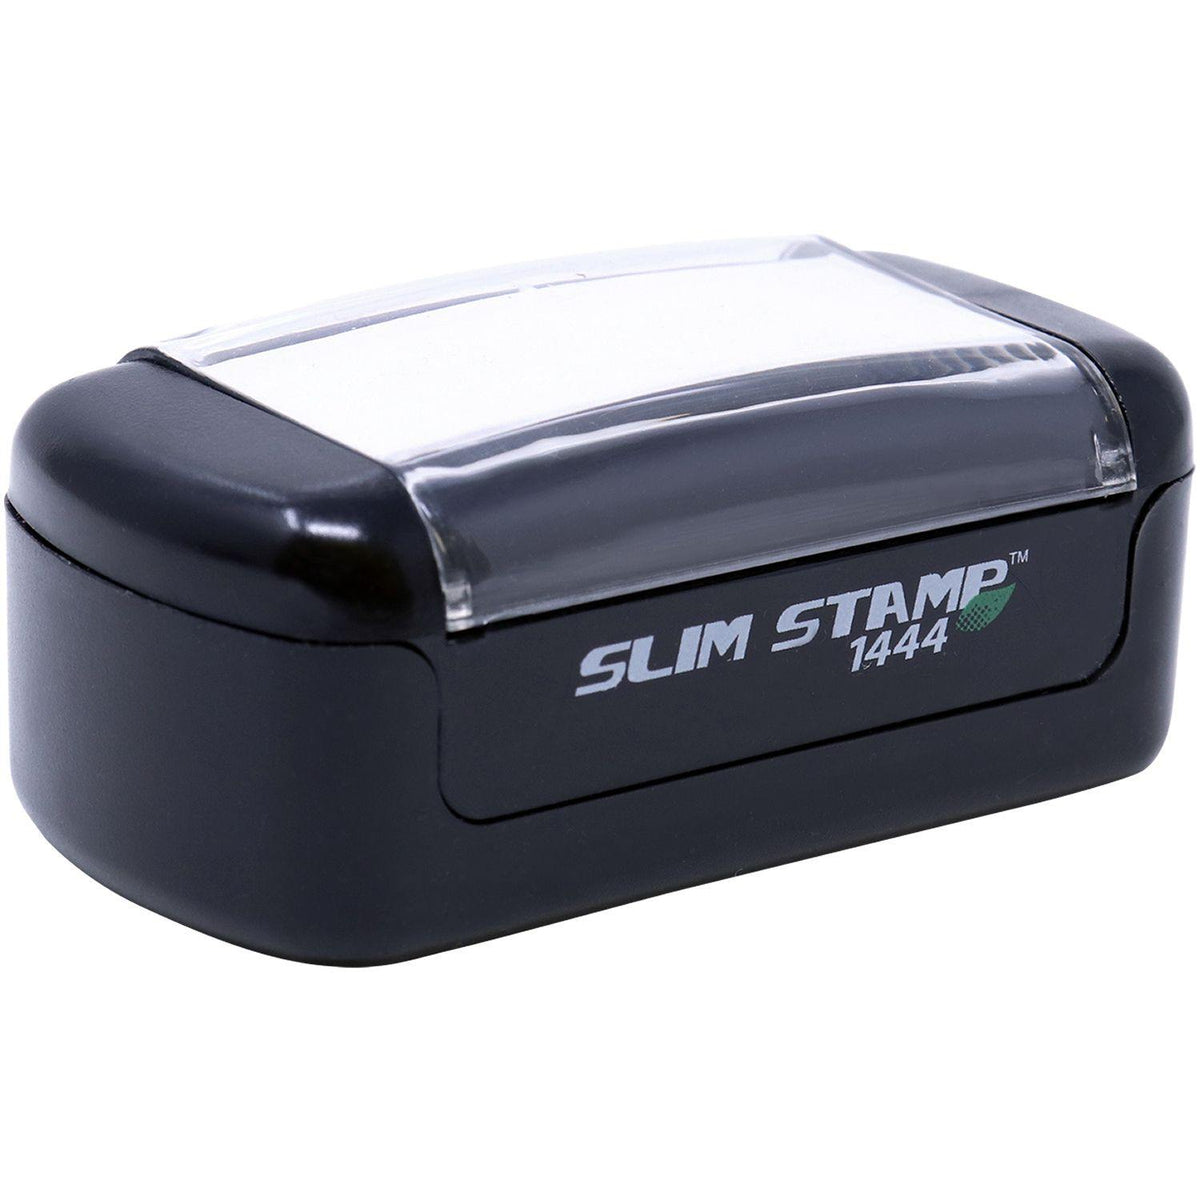 Alt View of Slim Pre-Inked Credito Stamp Mount Angle